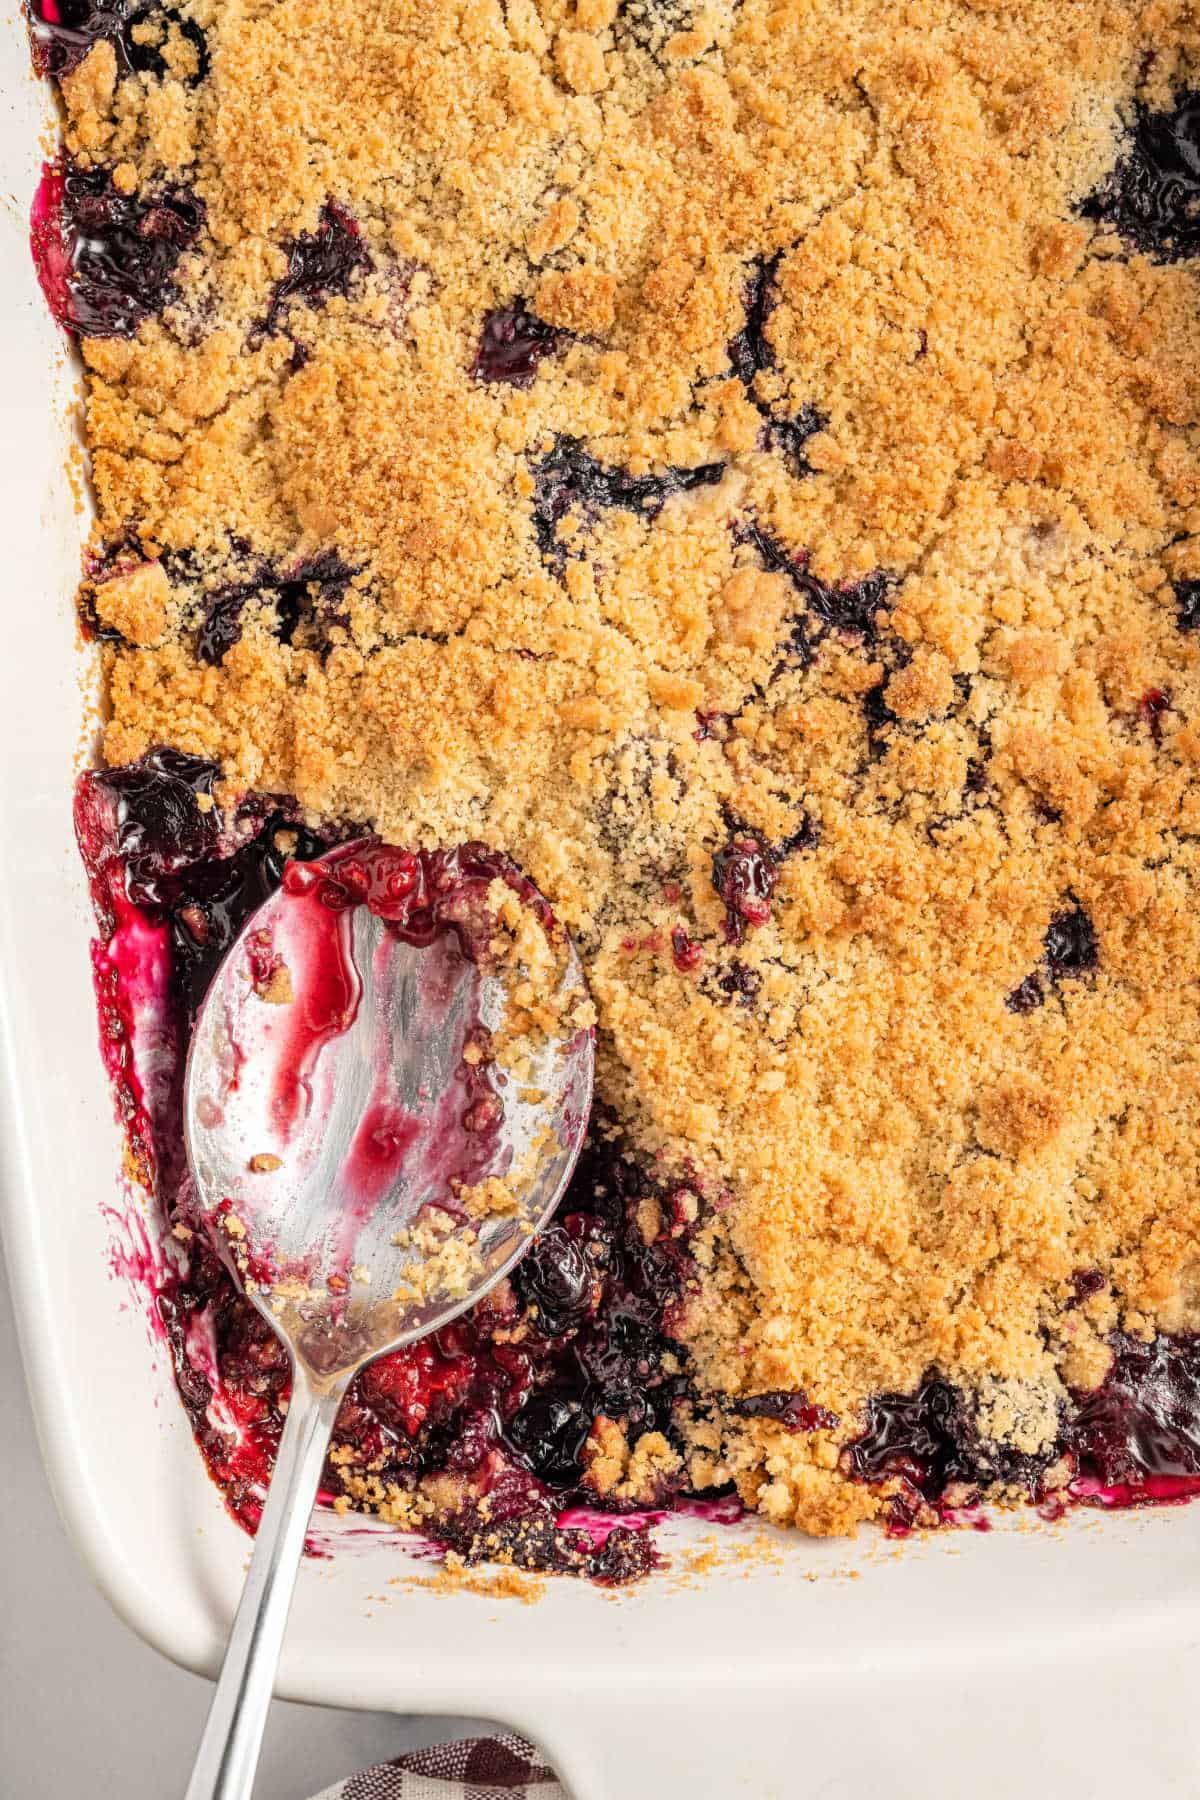 Berry crumble in a dish with a spoon.